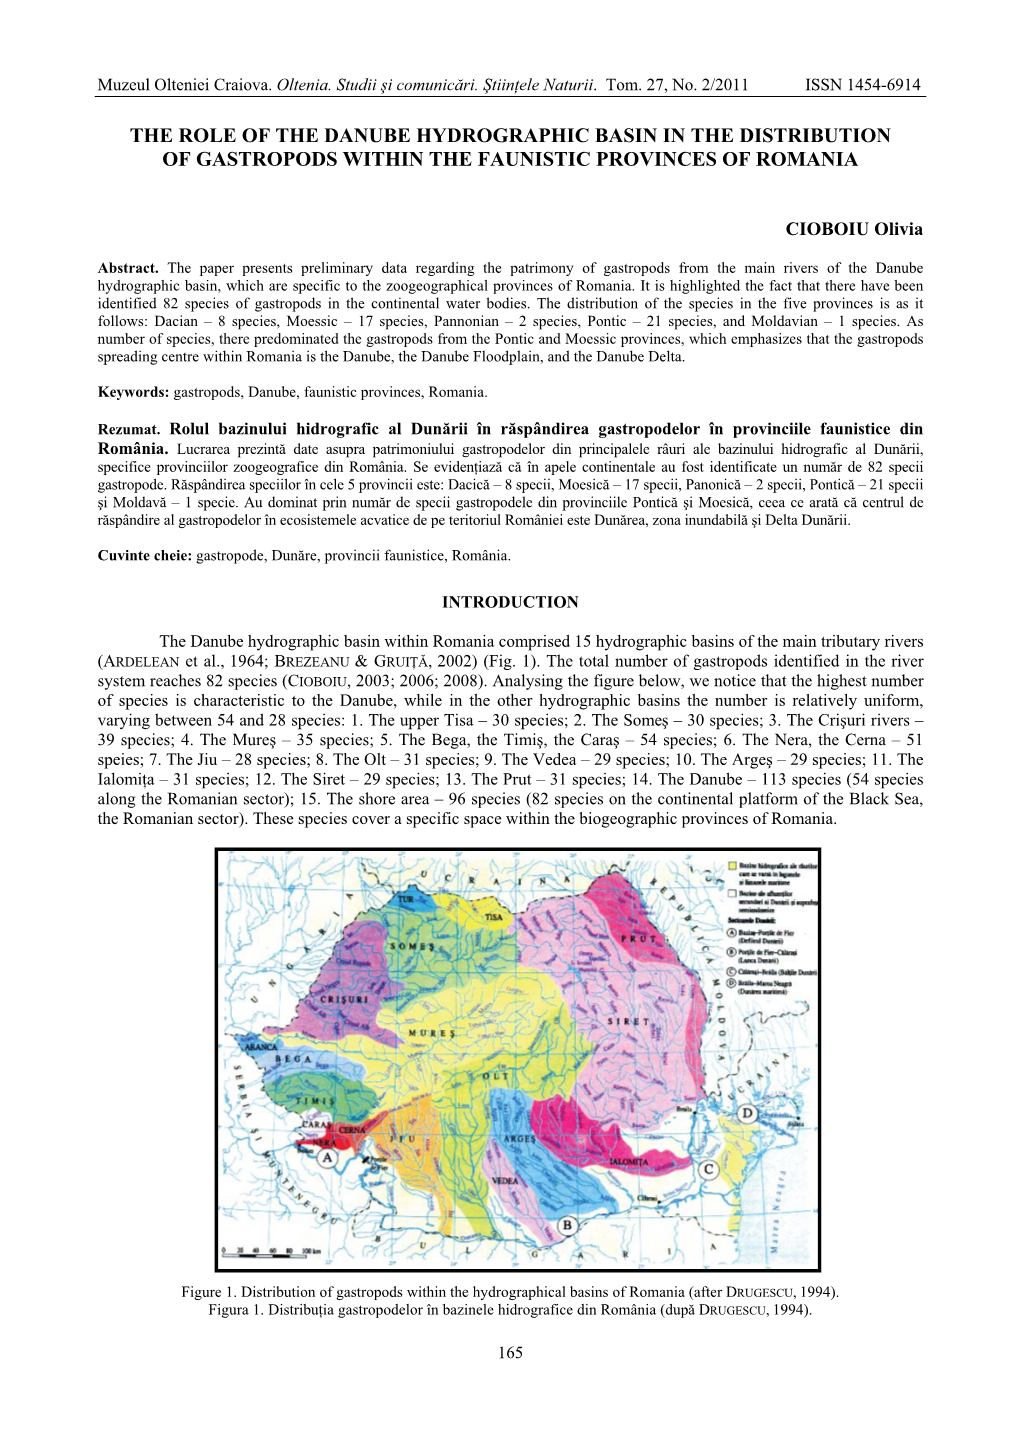 The Role of the Danube Hydrographic Basin in the Distribution of Gastropods Within the Faunistic Provinces of Romania